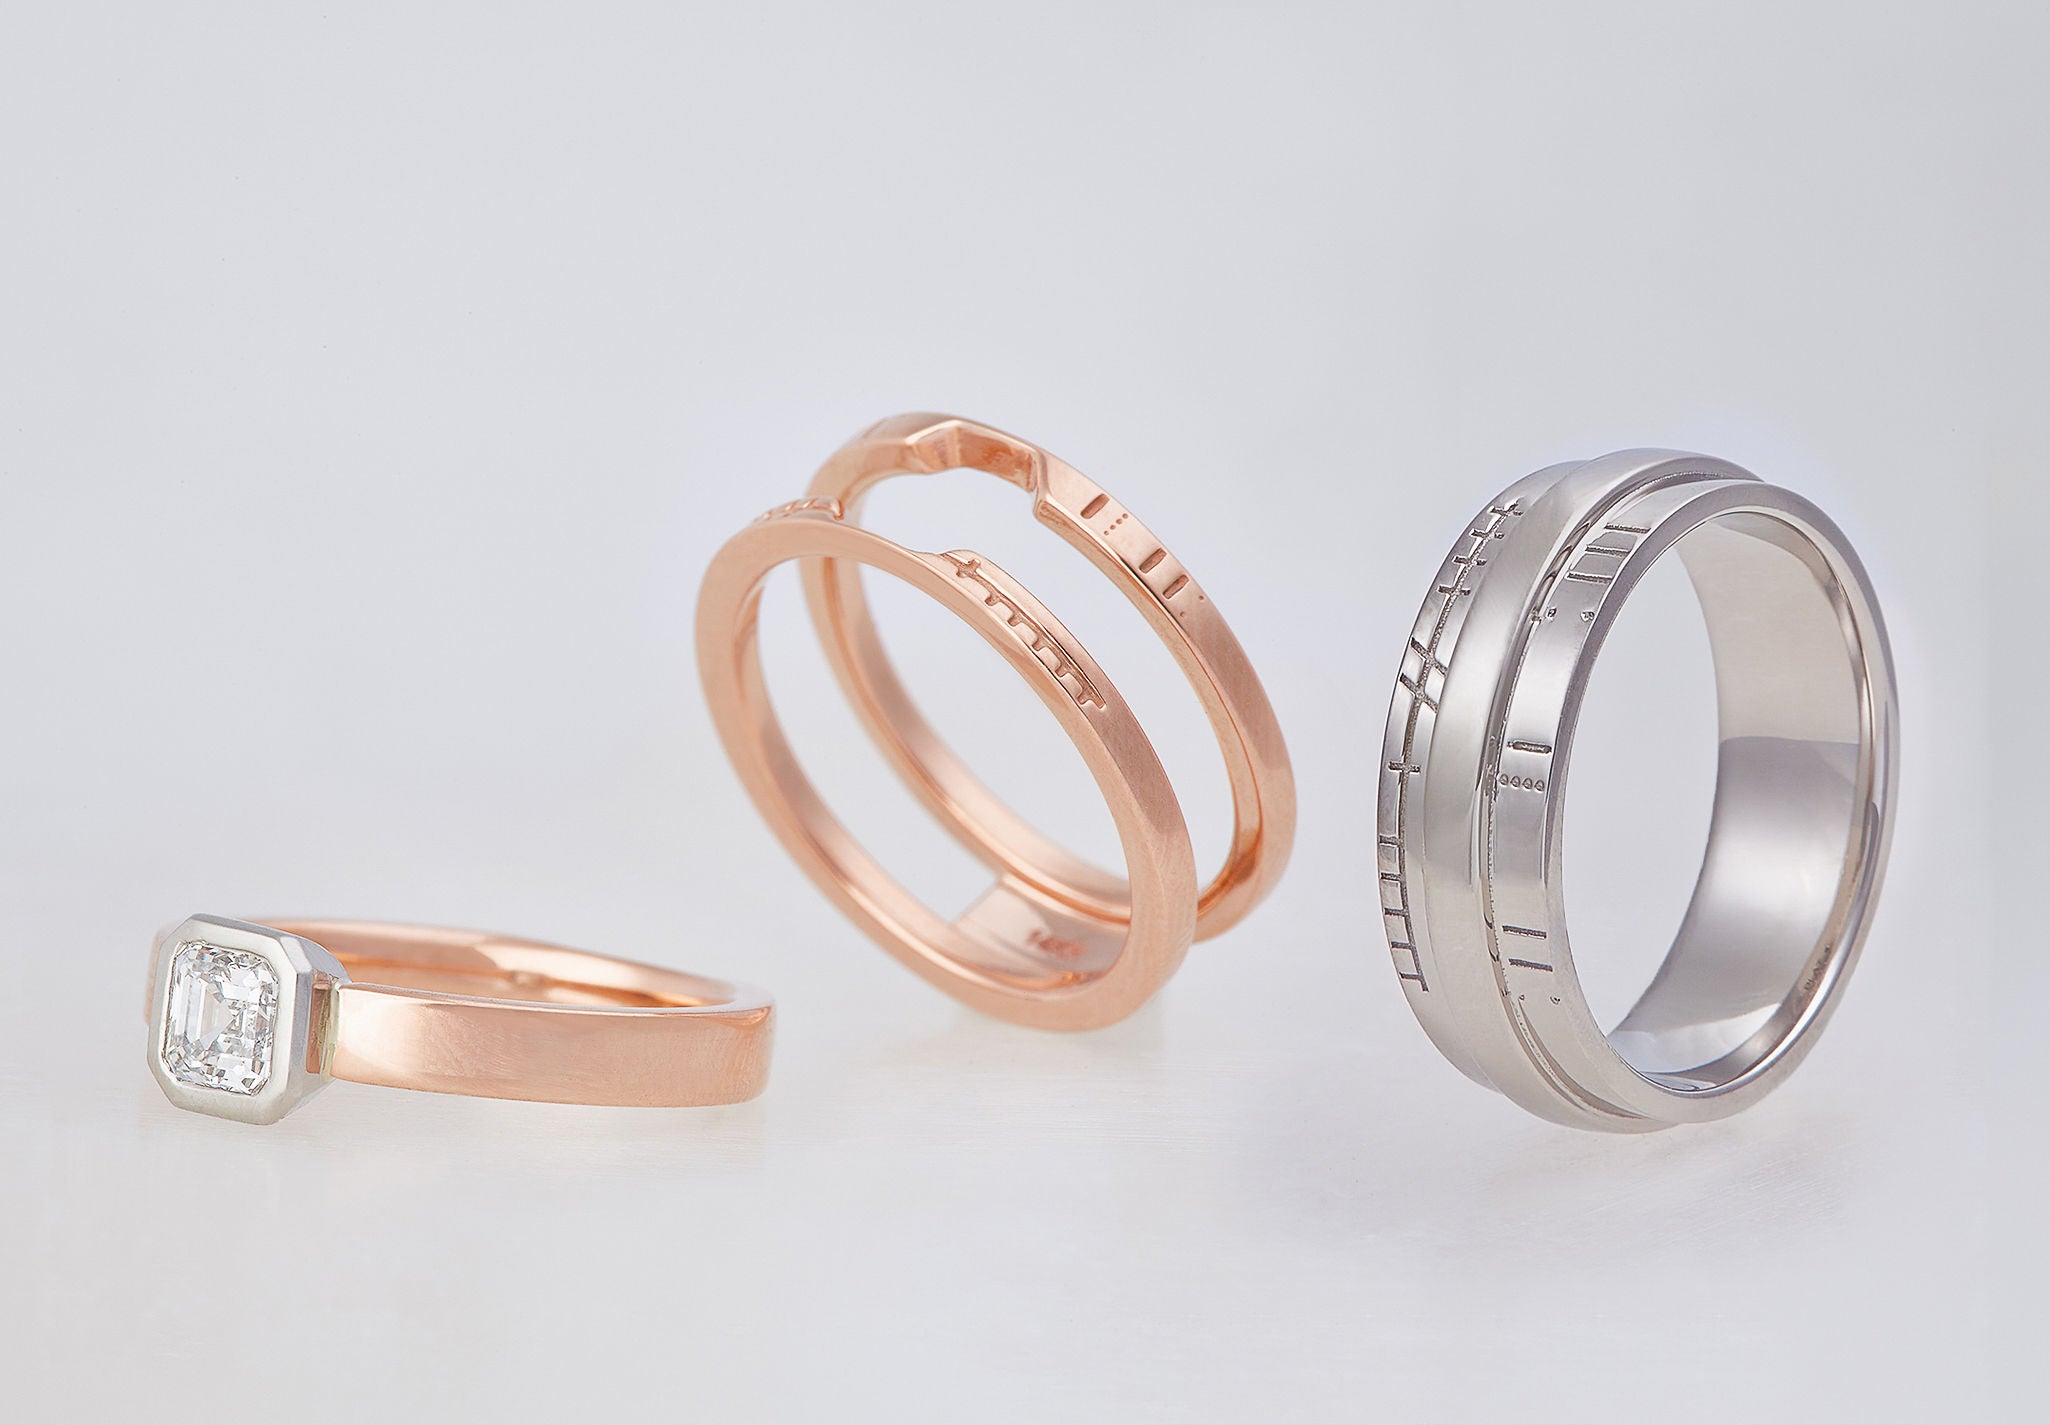 Wedding bands with Mayan numeric symbols and Ogham engraving